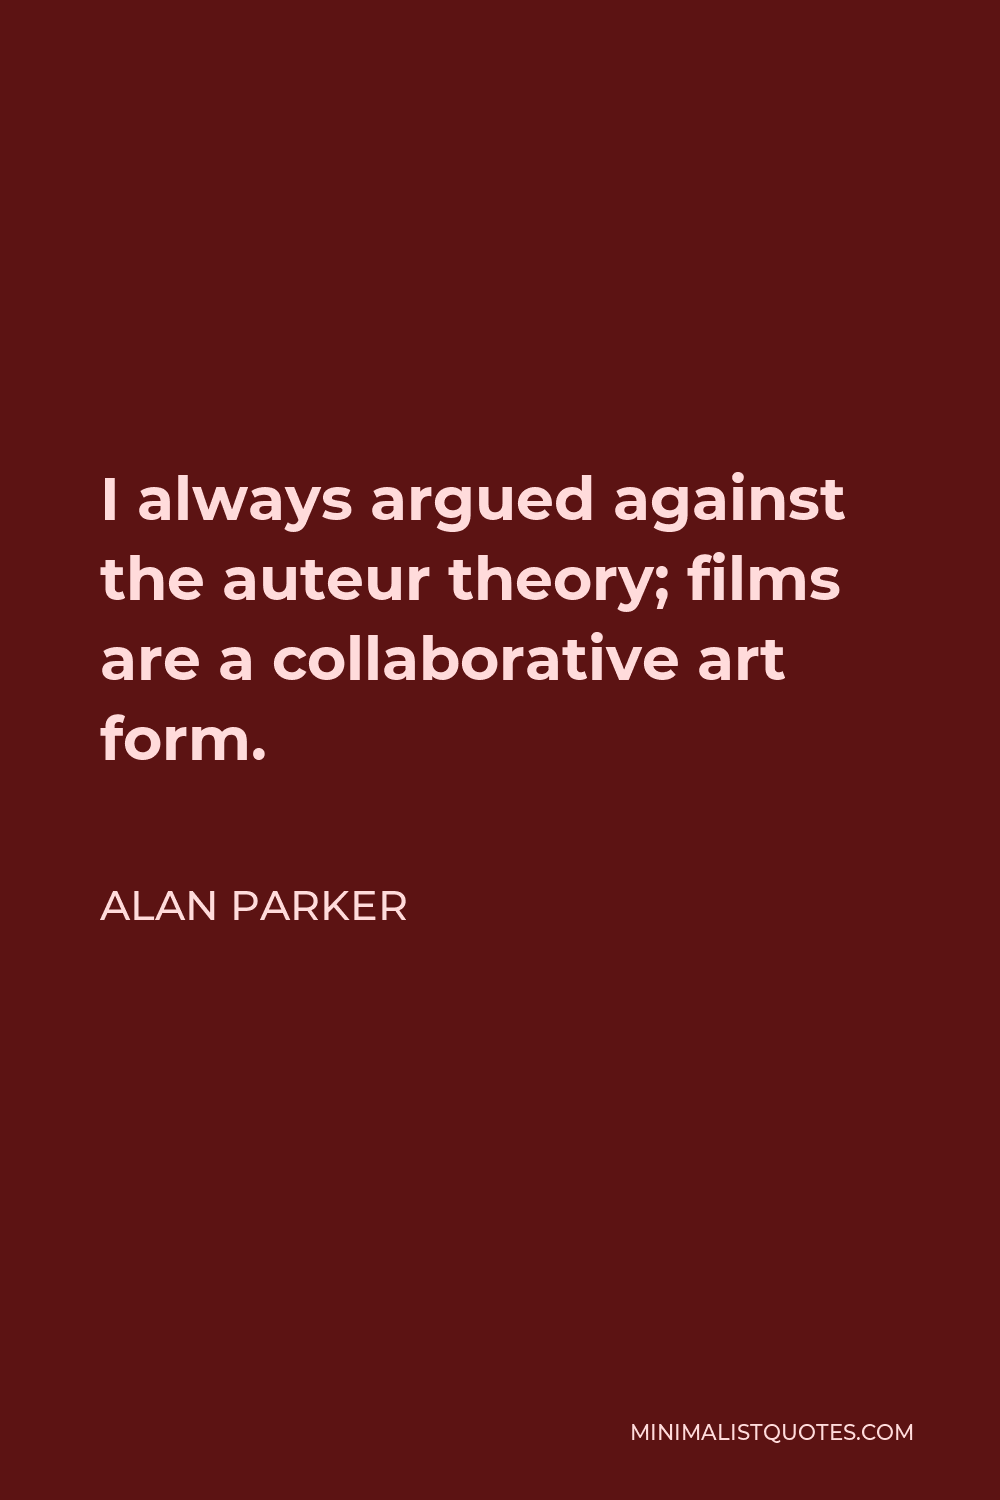 Alan Parker Quote - I always argued against the auteur theory; films are a collaborative art form.